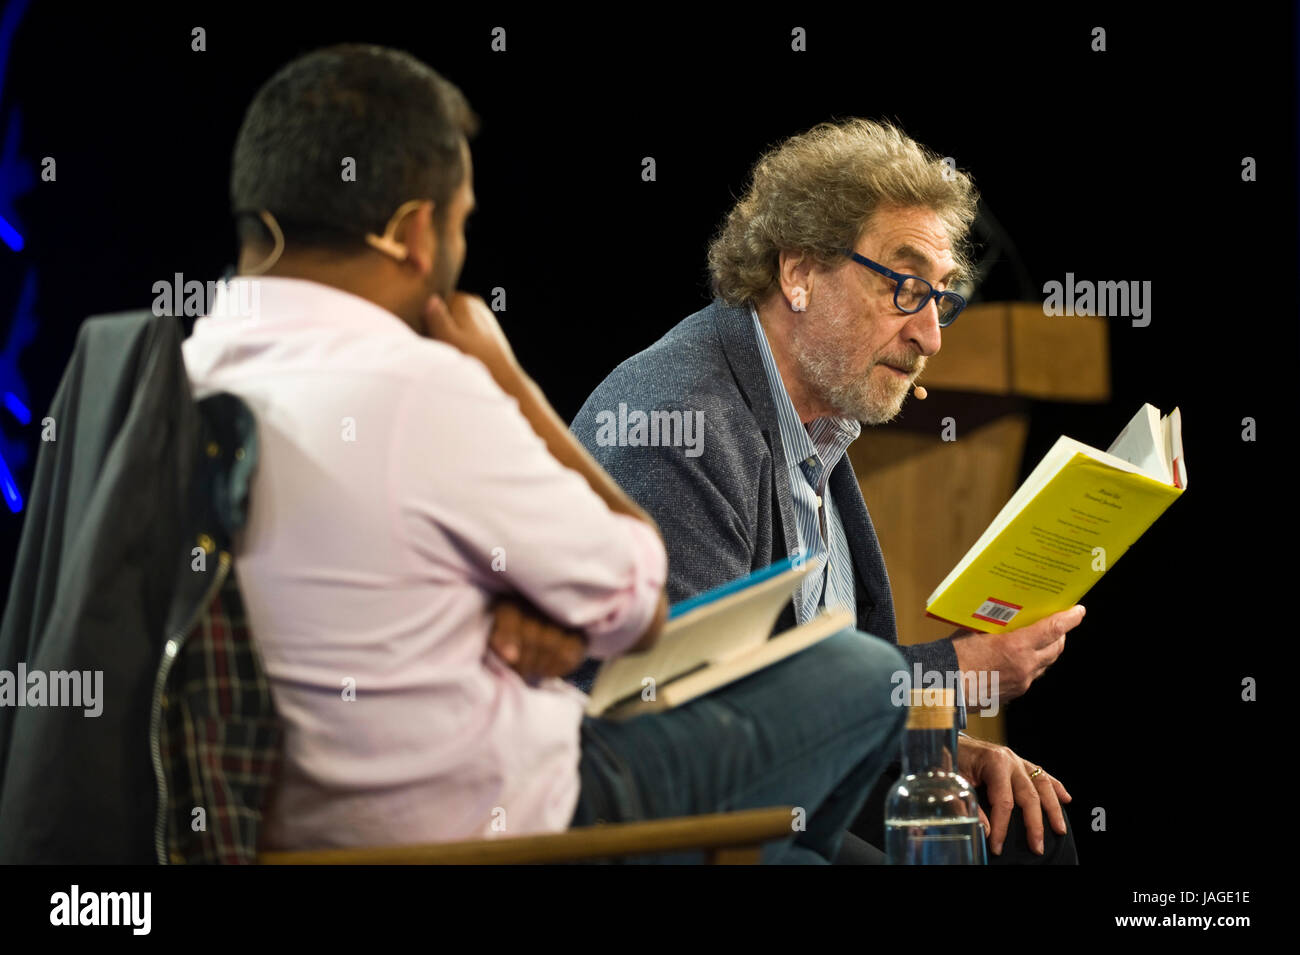 Howard Jacobson speaking about his writing on stage at Hay Festival 2017 Hay-on-Wye Powys Wales UK Stock Photo